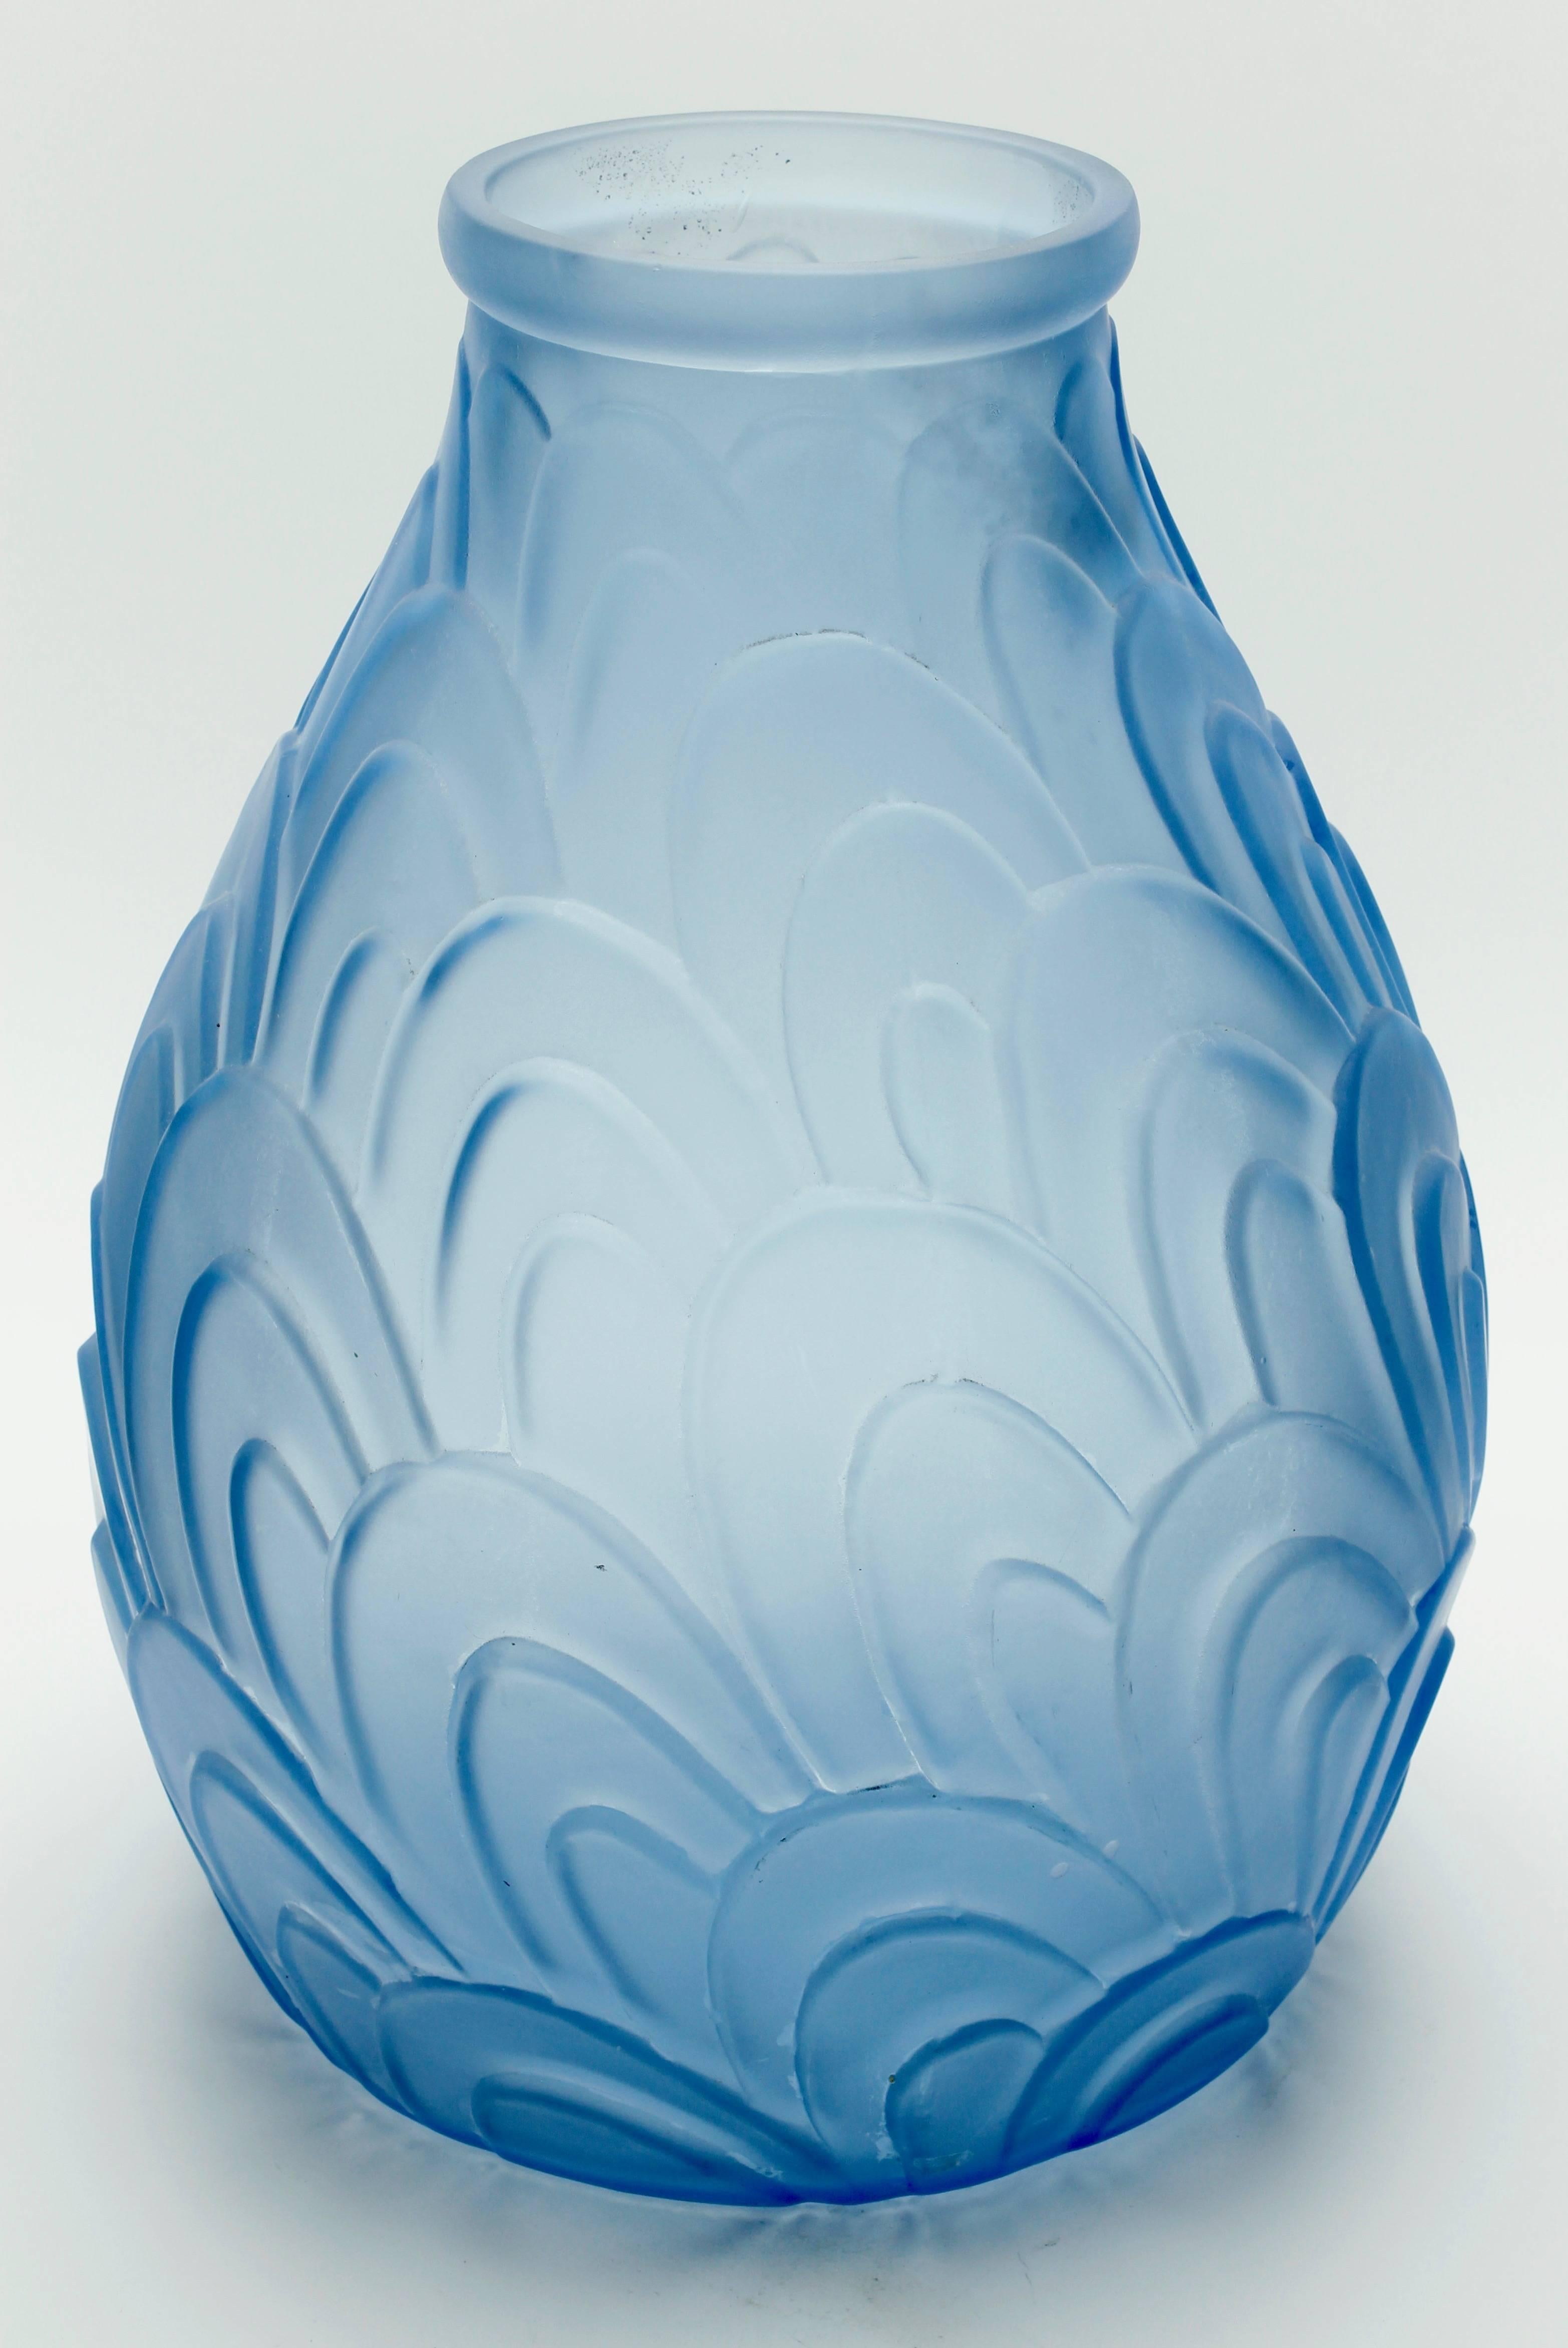 Art Deco vase, made of light-blue frosted pressed glass,

circa 1930, France, made of pressed glass, signed Sars, France
In good condition, with minor signs of wear. 

Measures: Height 30 cm and diameter 22 cm. Light-blue.
 